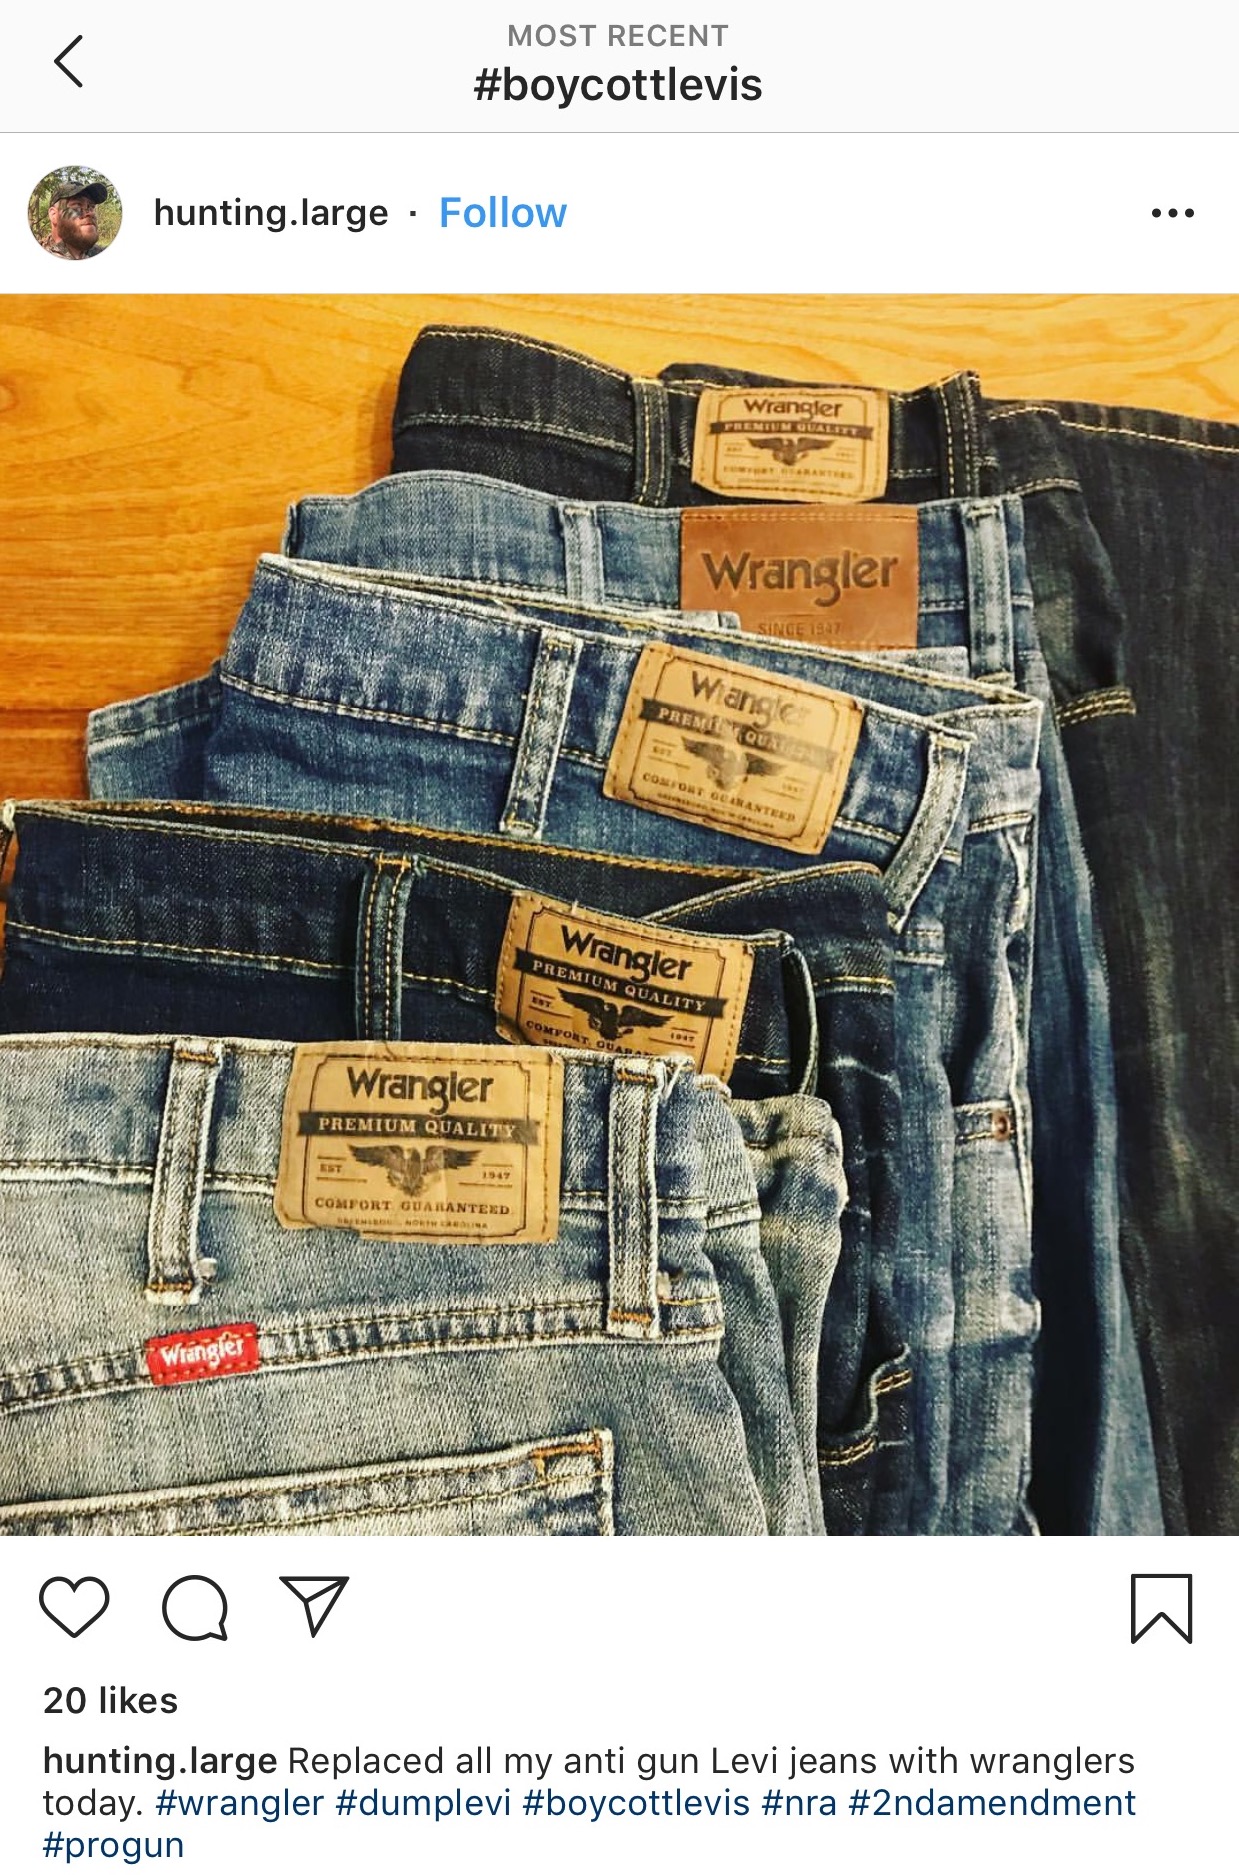 Levi's, Wrangler, Dickies, Carhartt: What Are the Best Cowboy Jeans?